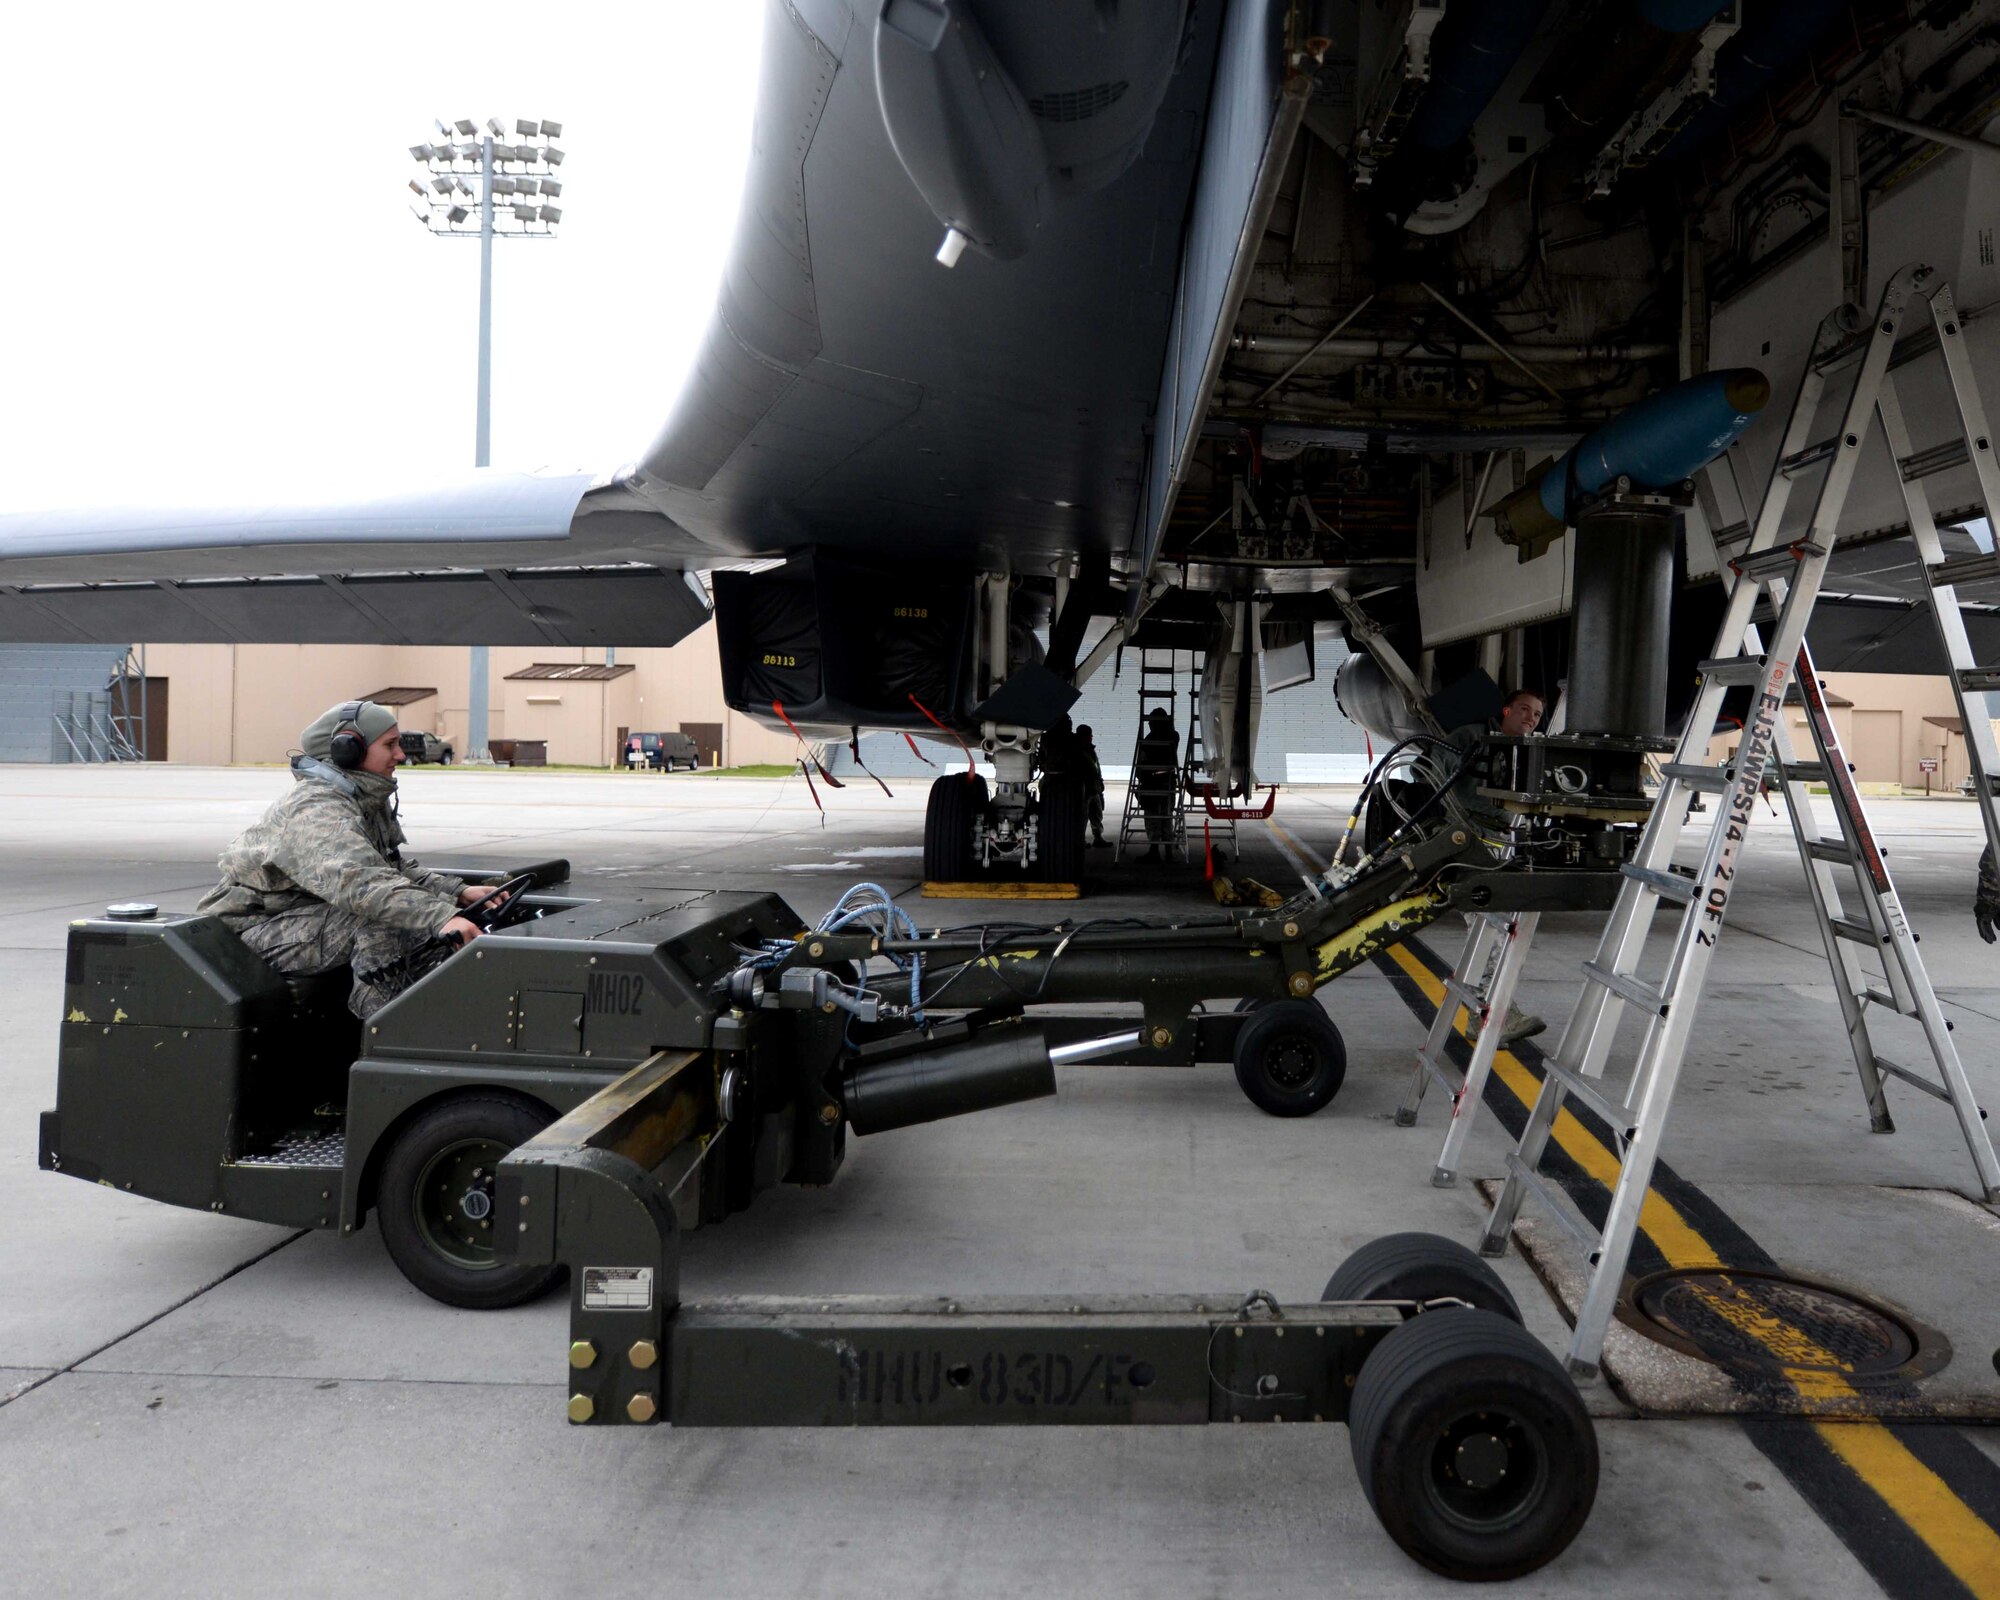 Airman Sidney Hering, 28th Aircraft Maintenance Squadron weapons load crewmember, uses a ram jammer to load an inert 500-pound training munition in preparation for a Global Power Mission from Ellsworth Air Force Base, S.D., May 12, 2014. During the mission, B-1 aircrews flew 13,200 miles round trip and employed munitions accurately within a 5 meter target area on a training range near Guam. (U.S. Air Force photo by Airman 1st Class Rebecca Imwalle)